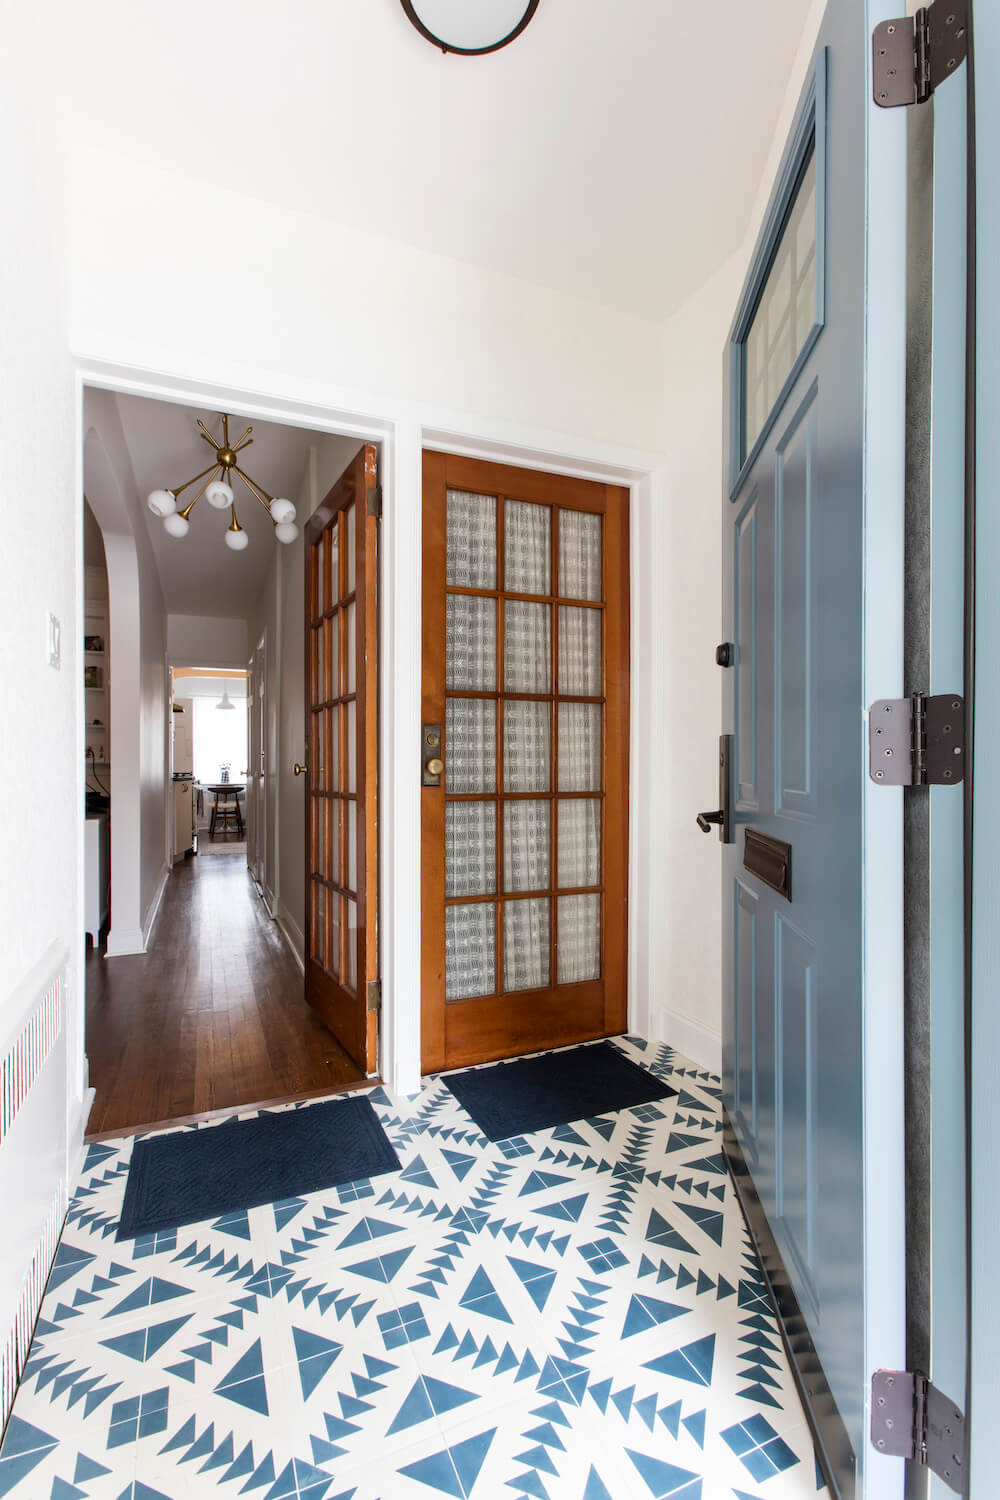 patterned tiles at entryway with two wooden doors after renovation